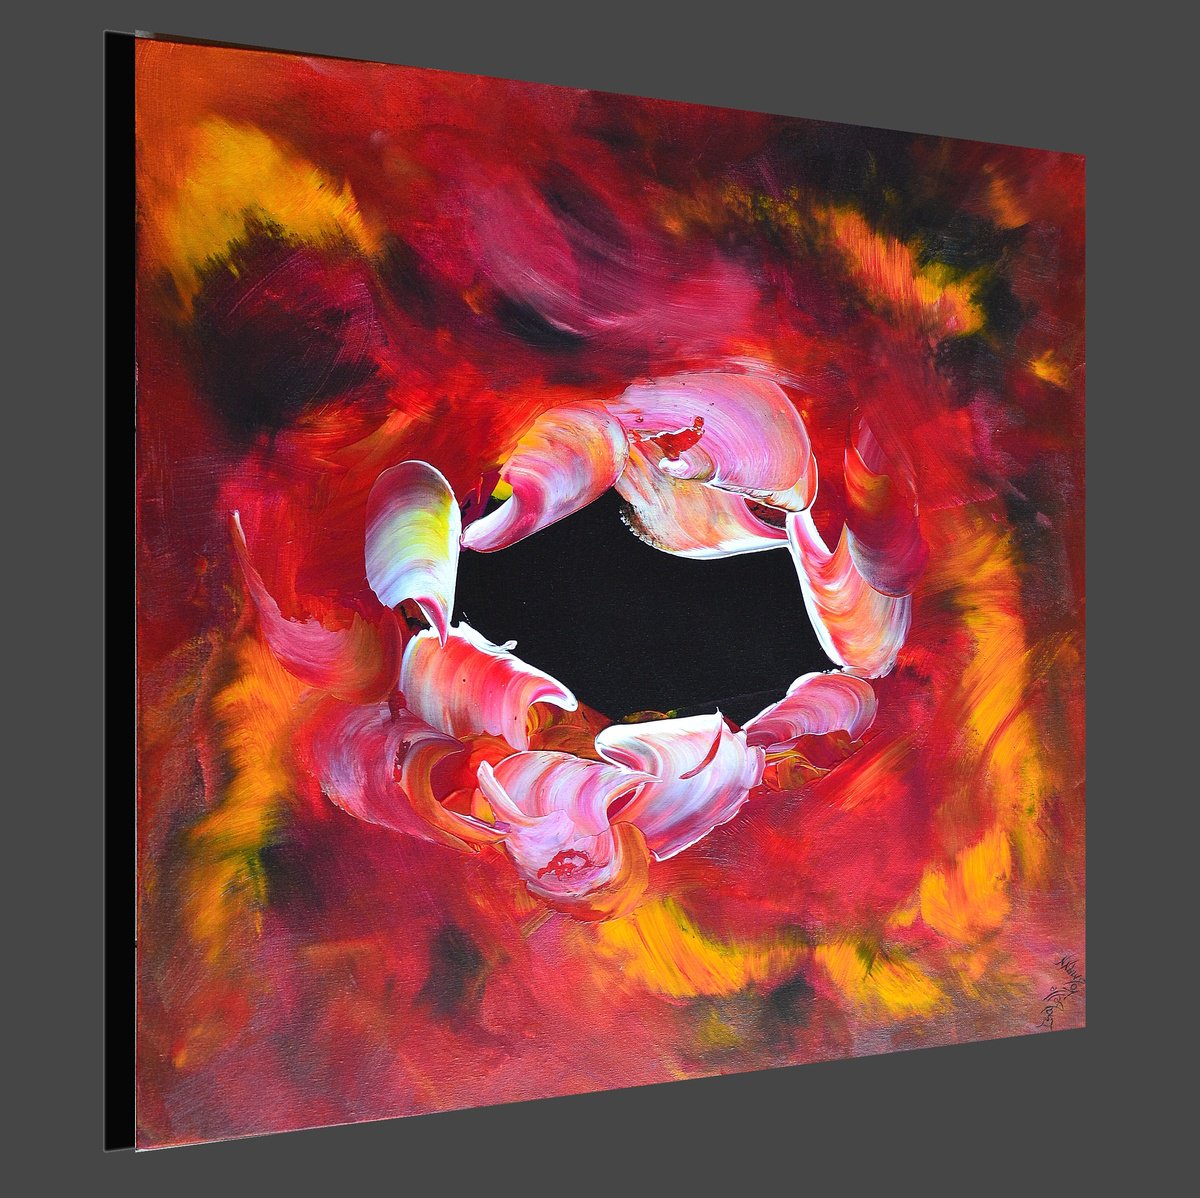 Magic dream - Free shipping - square - abstract - ready to hang by Isabelle Vobmann